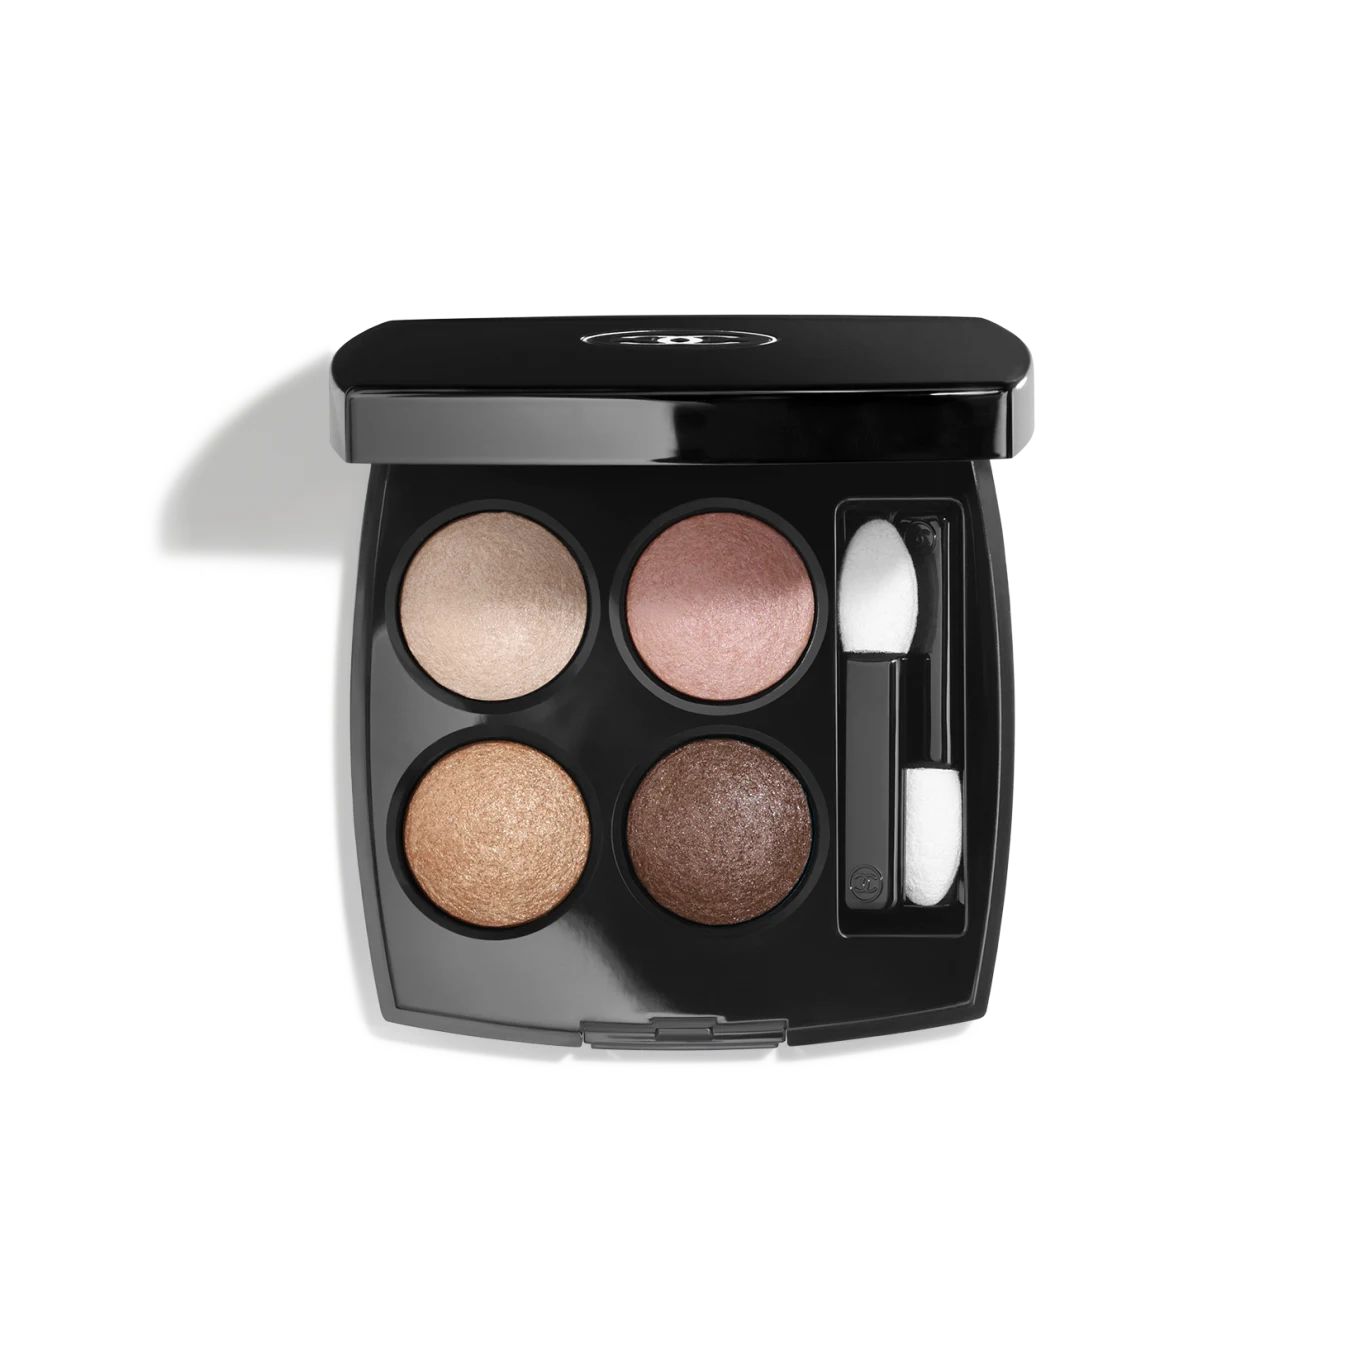 LES 4 OMBRES Multi-effect quadra eyeshadow 79 - Spices | CHANEL | Chanel, Inc. (US)